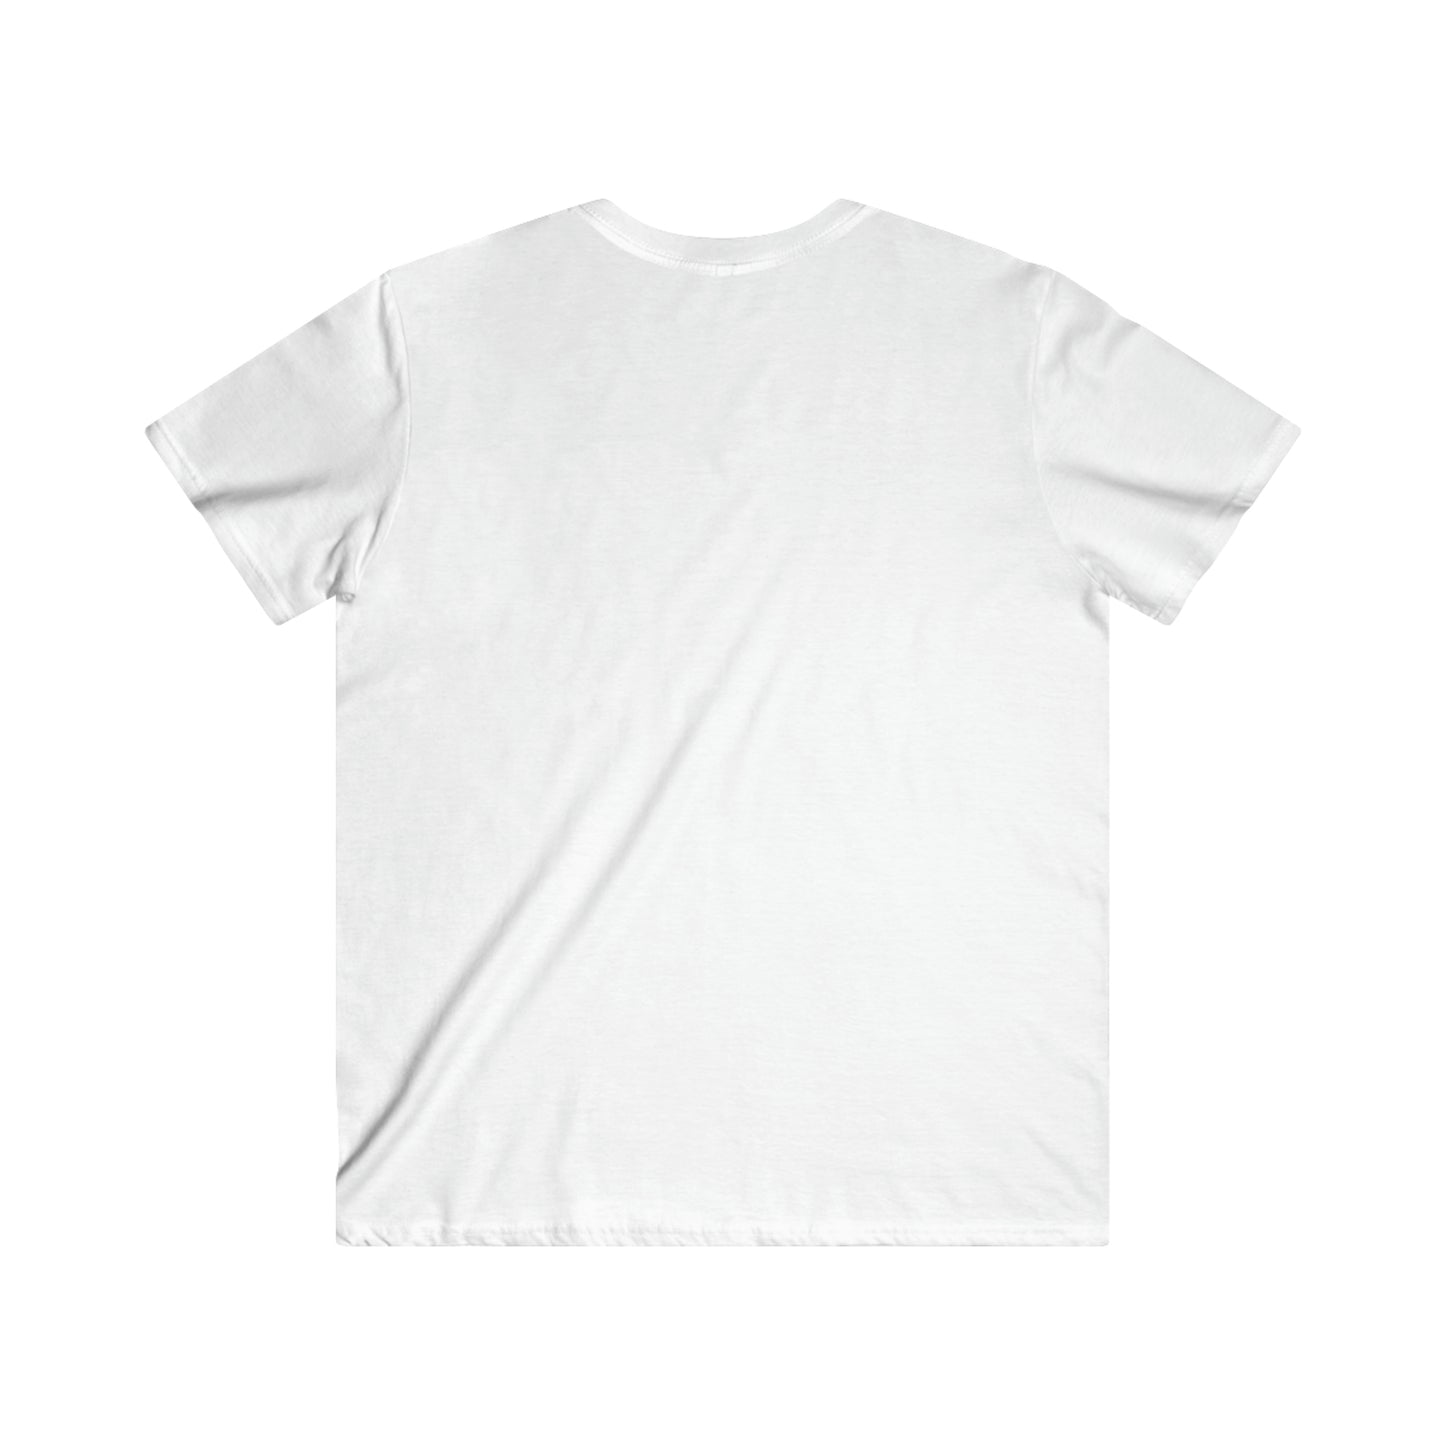 Copy of Men's Fitted V-Neck Short Sleeve Tee